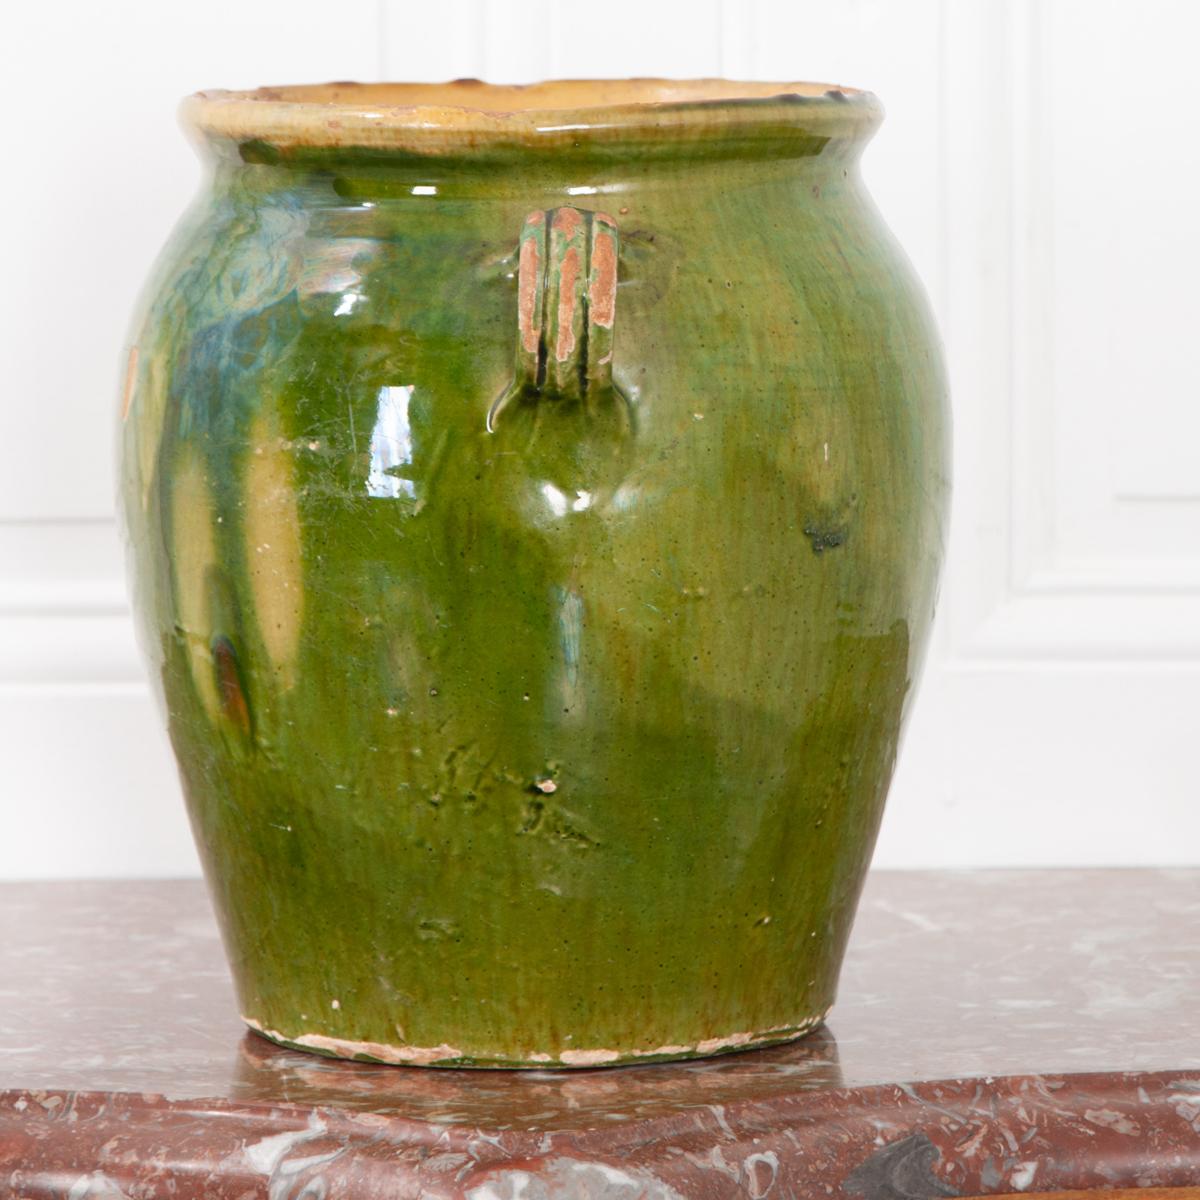 Dark green glazed confit jar for storing meat and fat. Most of these jars are only glazed on the top half of the exterior and on the inside, but this jar is fully glazed except the bottom. While the exterior is dark green, the interior is glazed in